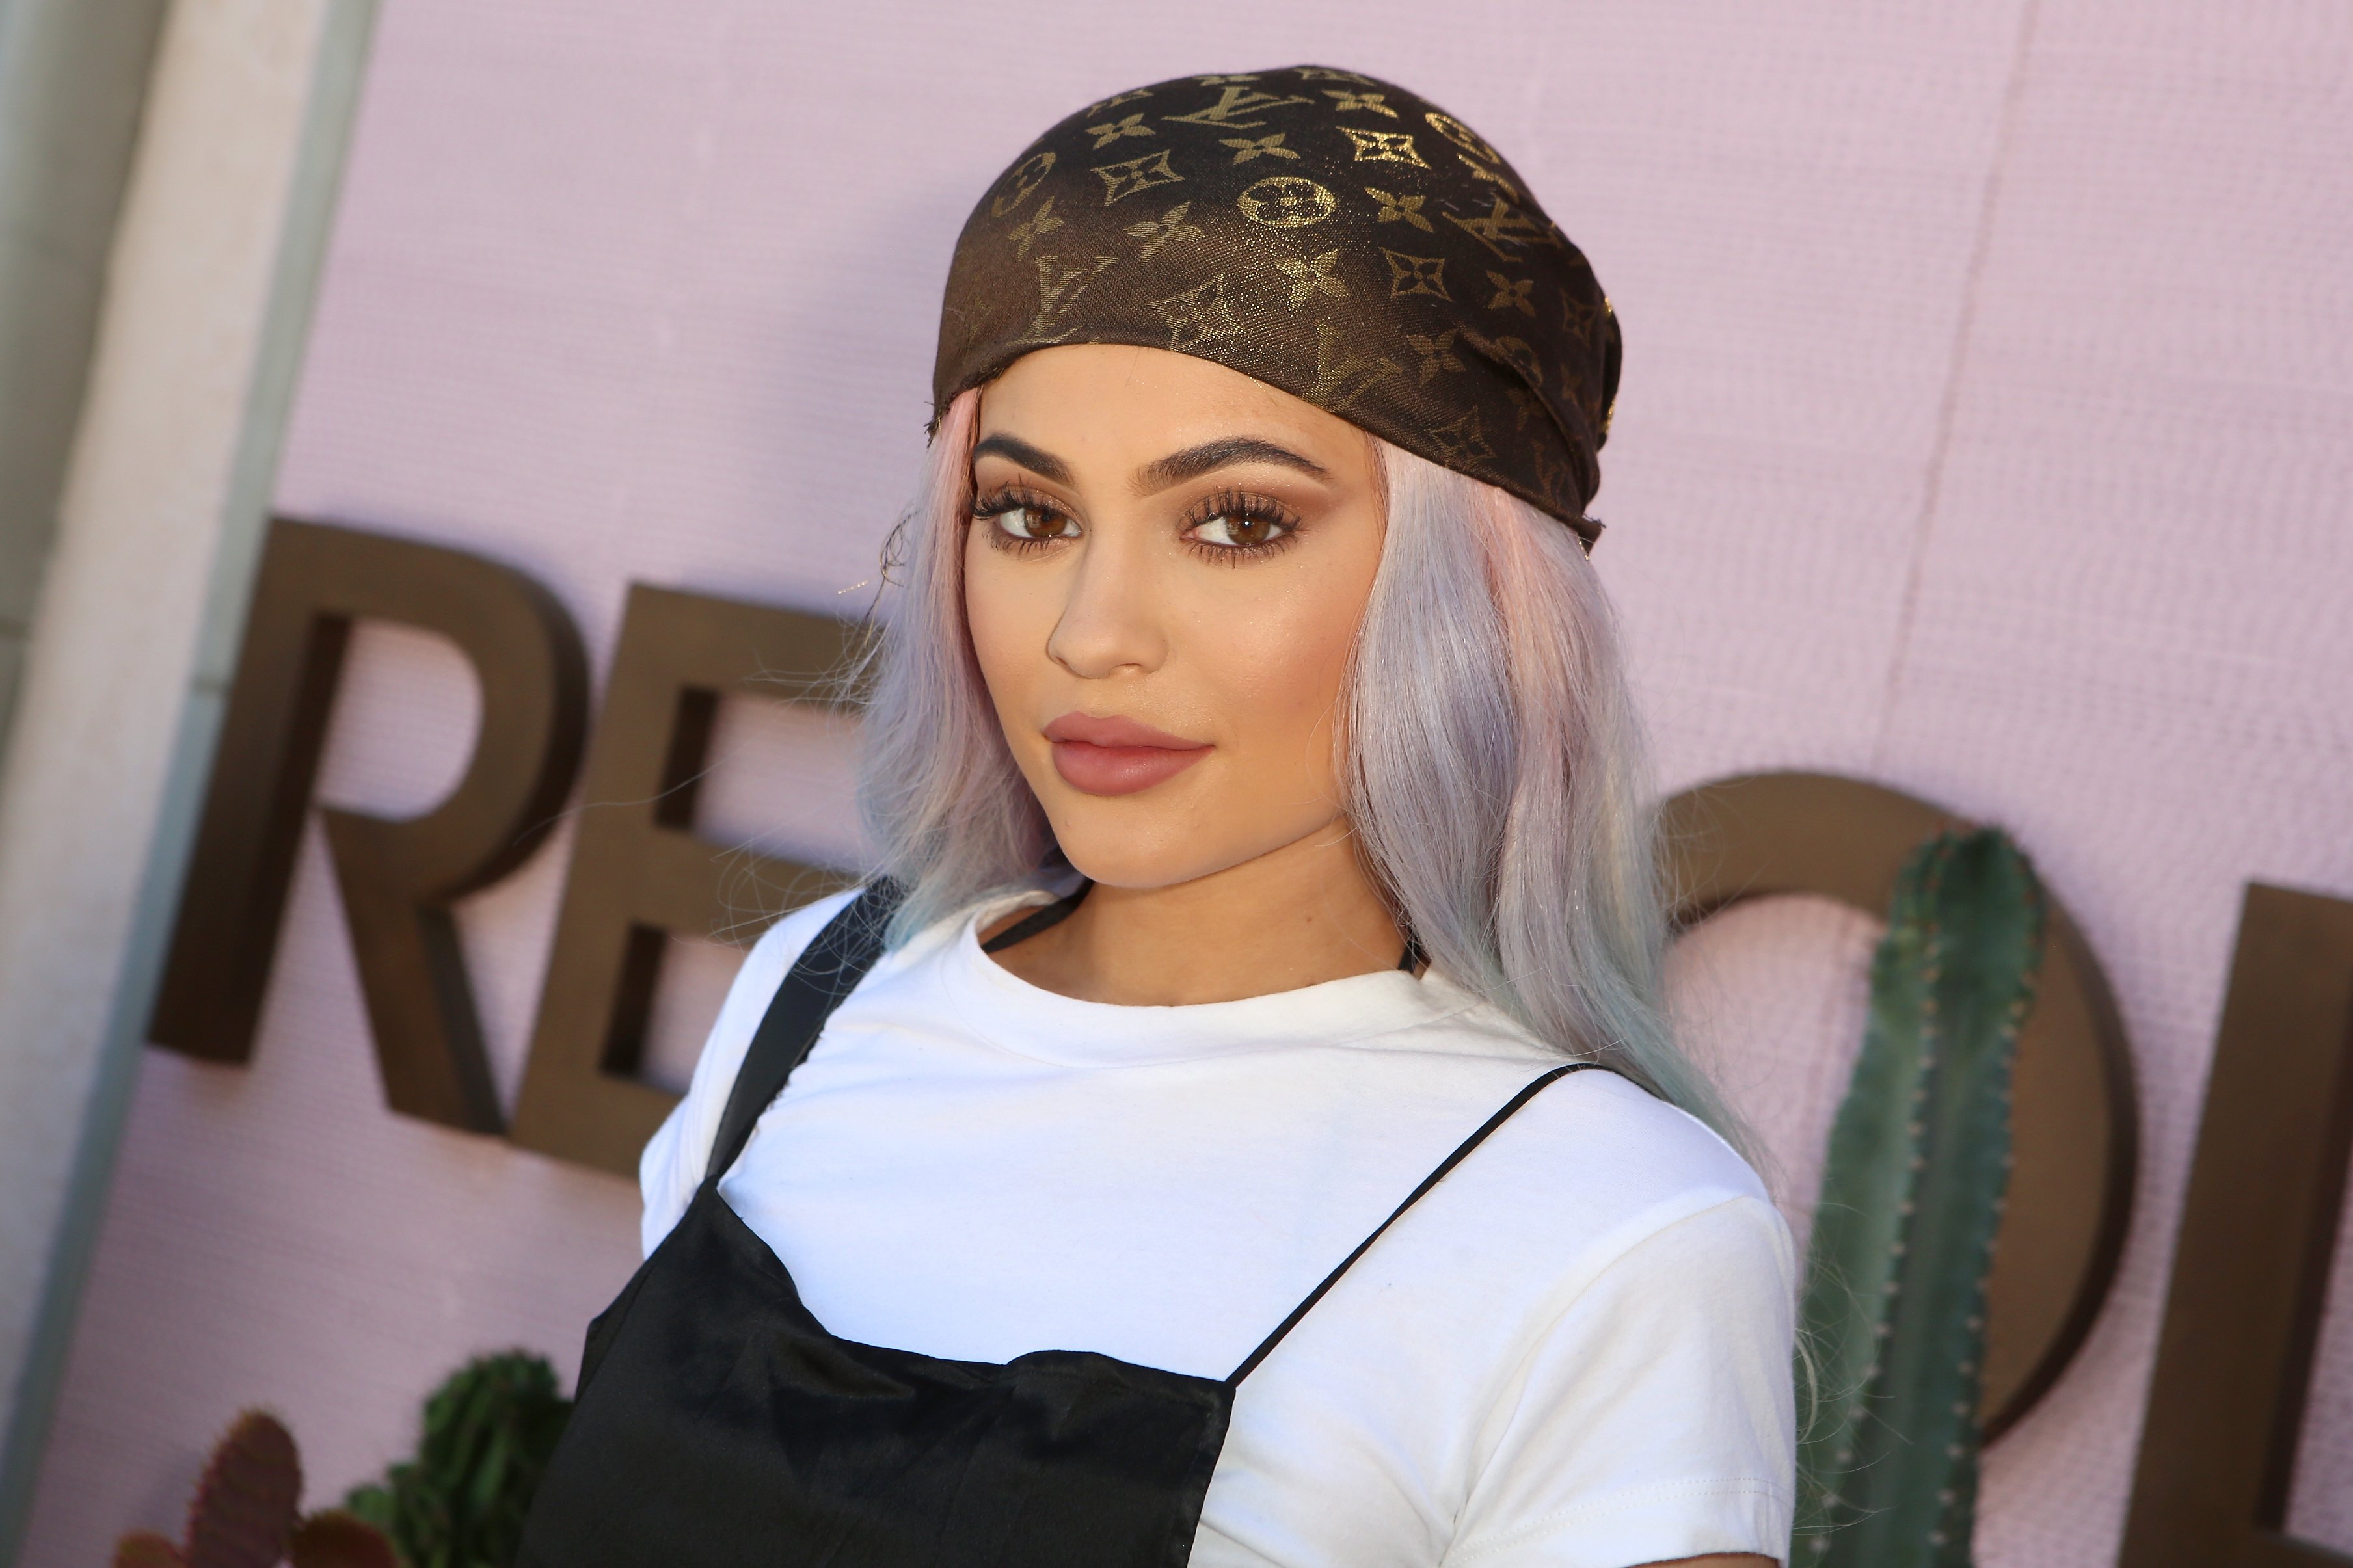 Kylie Jenner at REVOLVE Desert House in April 2016. | Photo: Getty Images